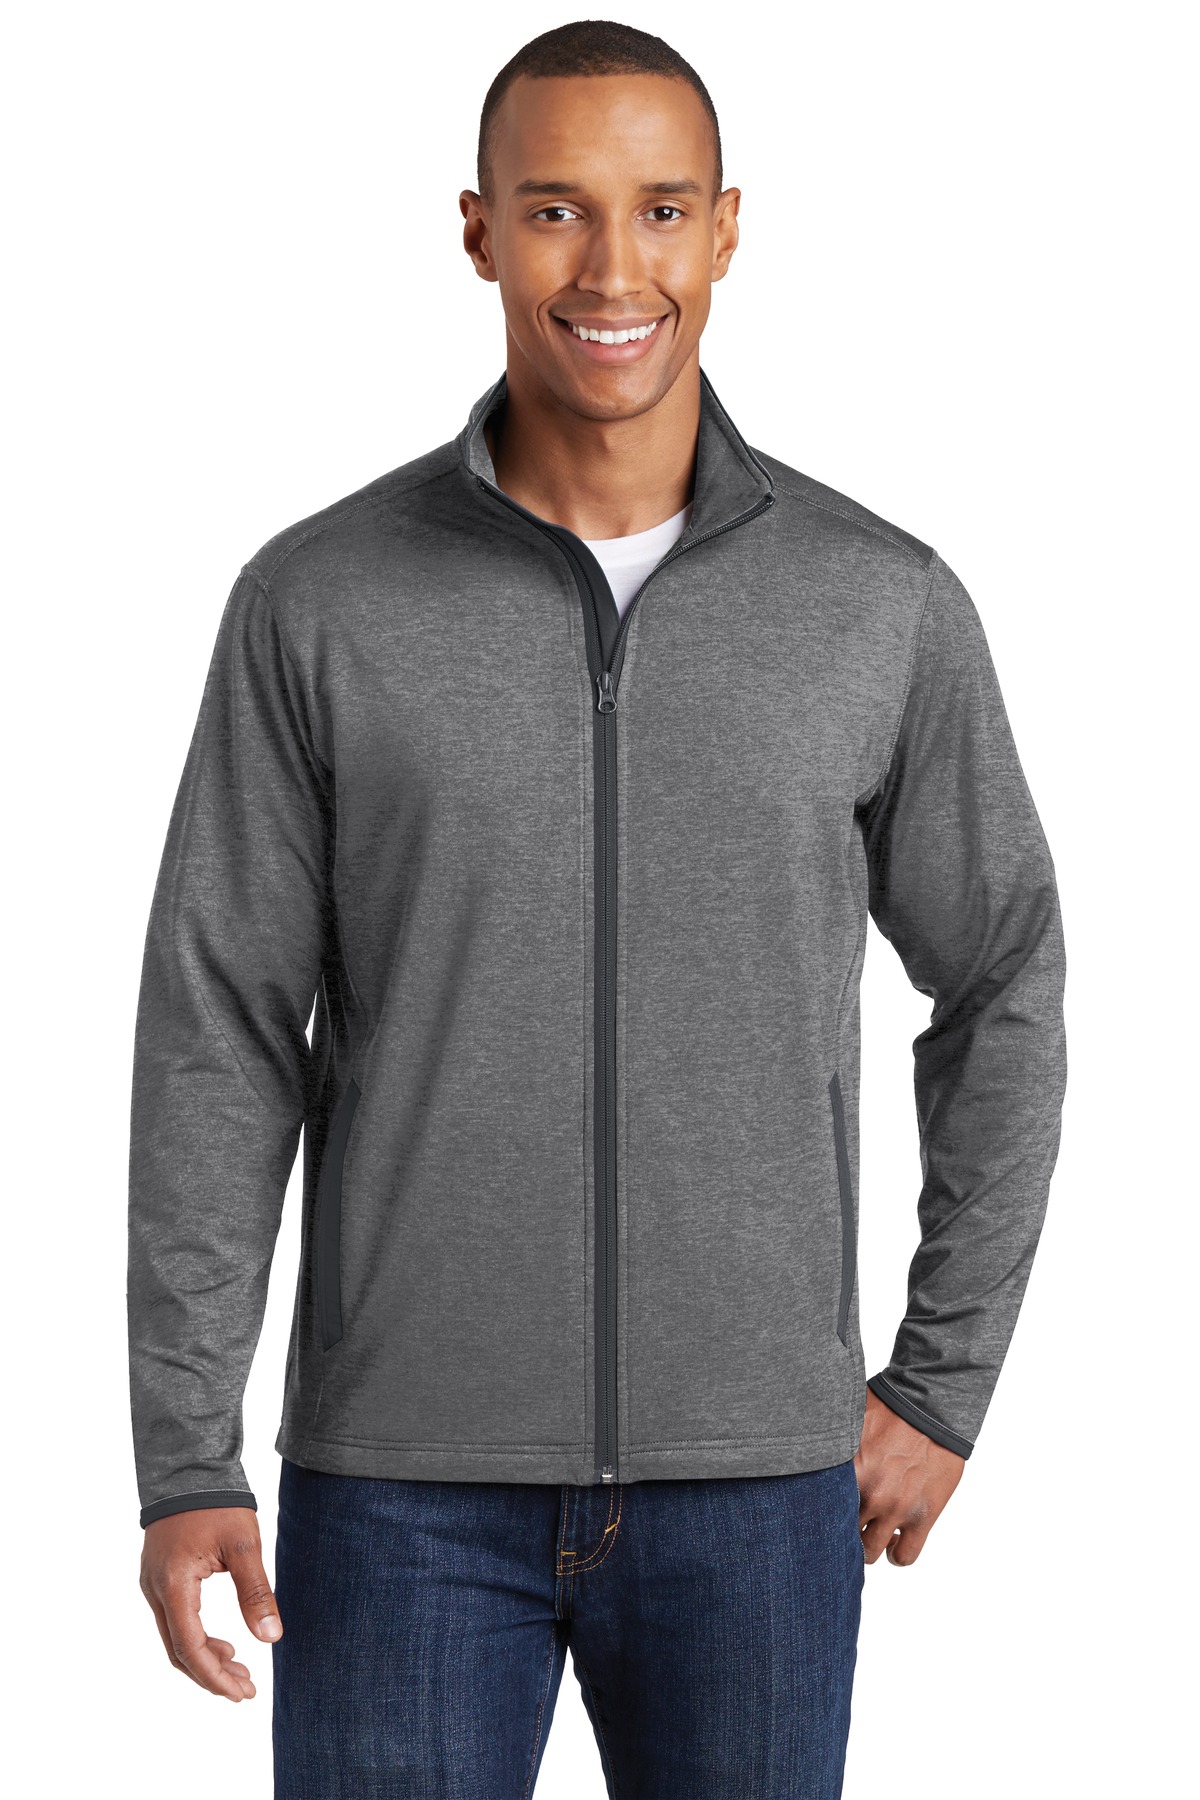 click to view Charcoal Grey Heather/ Charcoal Grey